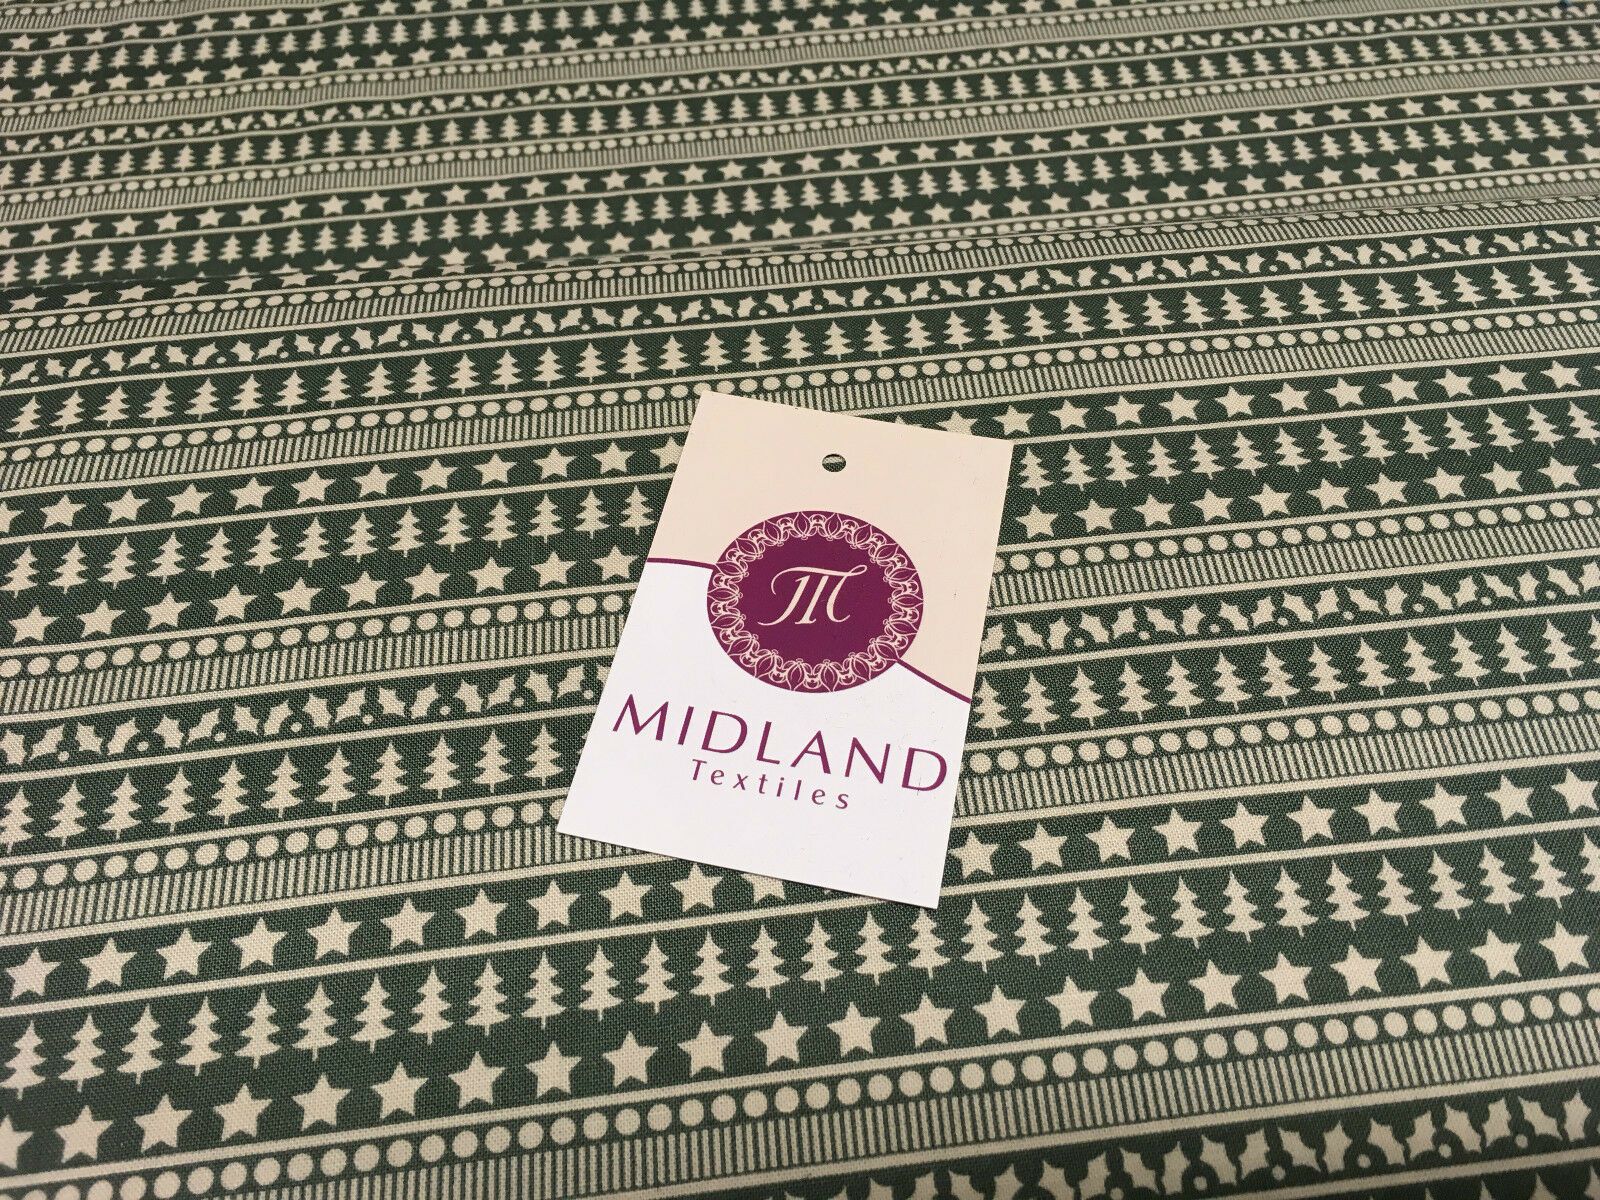 Green Scandi 100% Cotton Christmas themed Patchwork & Crafting  Fabric 45" Mtex